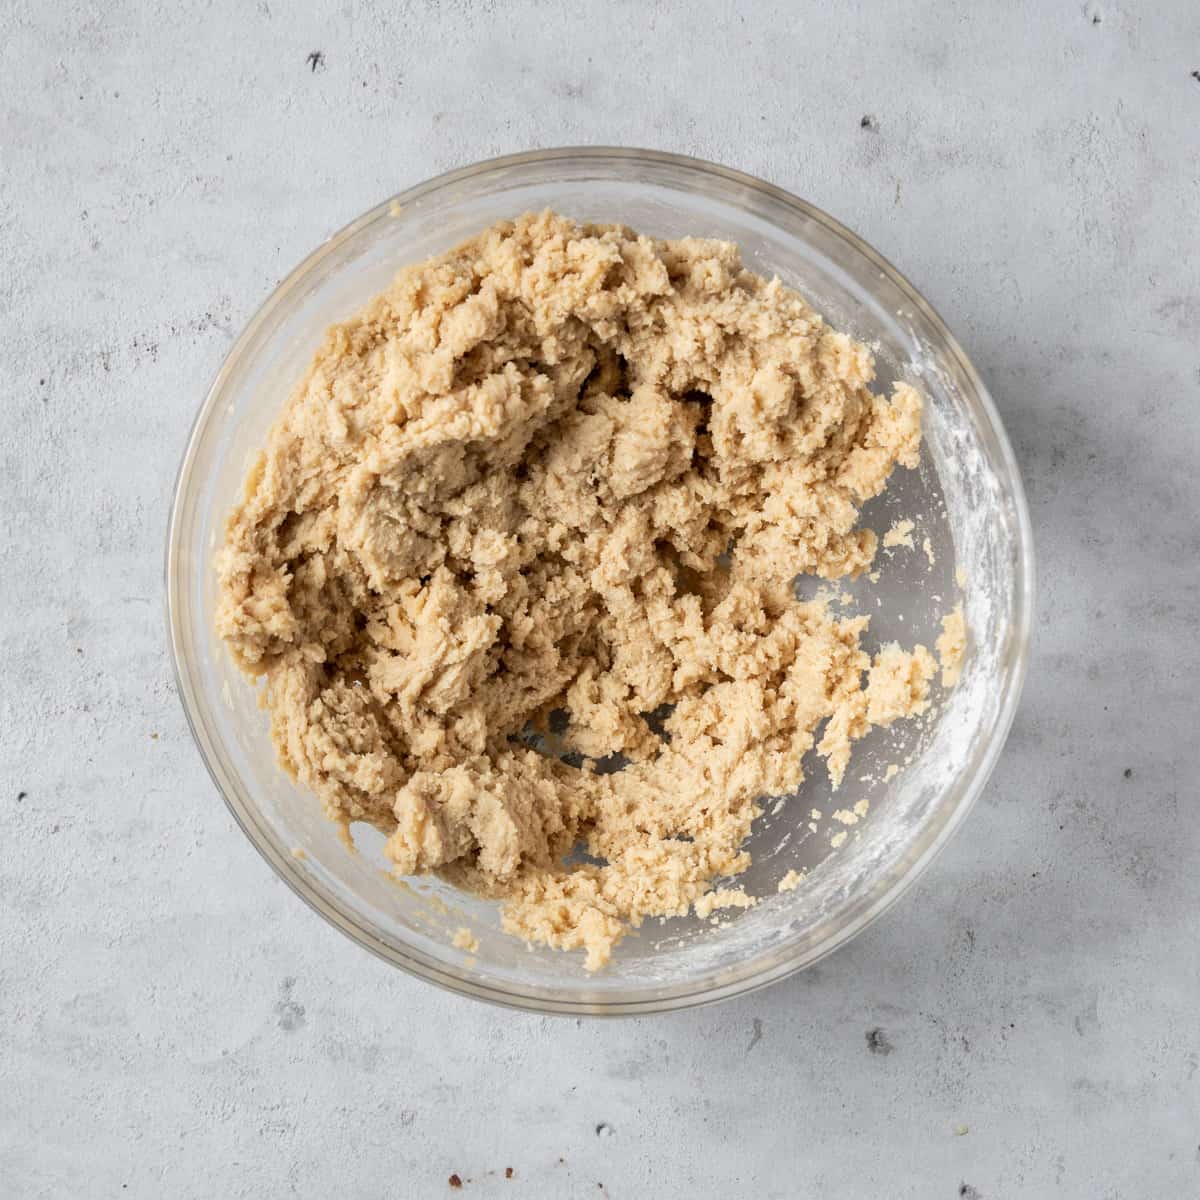 the completed cookie dough in a glass bowl on grey background.